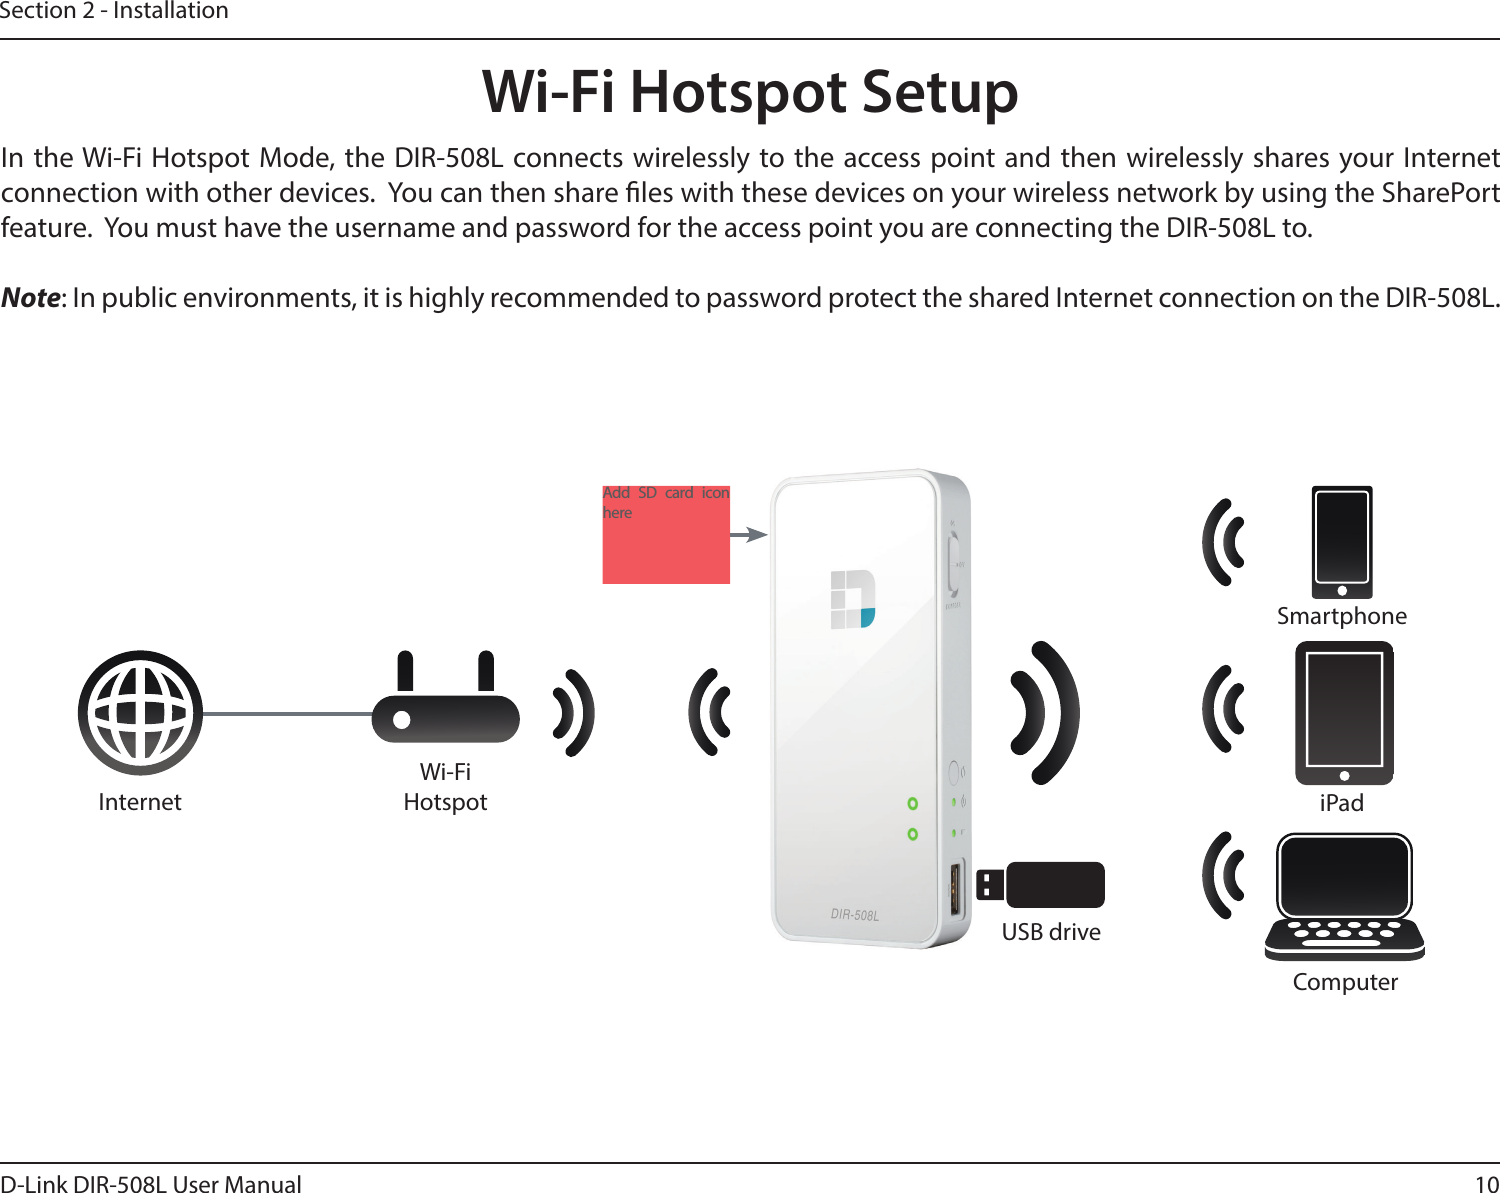 10D-Link DIR-508L User ManualSection 2 - InstallationWi-Fi Hotspot SetupIn the Wi-Fi Hotspot Mode, the DIR-508L connects wirelessly to the access point and then wirelessly shares your Internet connection with other devices.  You can then share les with these devices on your wireless network by using the SharePort feature.  You must have the username and password for the access point you are connecting the DIR-508L to.Note: In public environments, it is highly recommended to password protect the shared Internet connection on the DIR-508L.ComputeriPadSmartphoneInternetWi-Fi HotspotUSB driveAdd SD card icon here